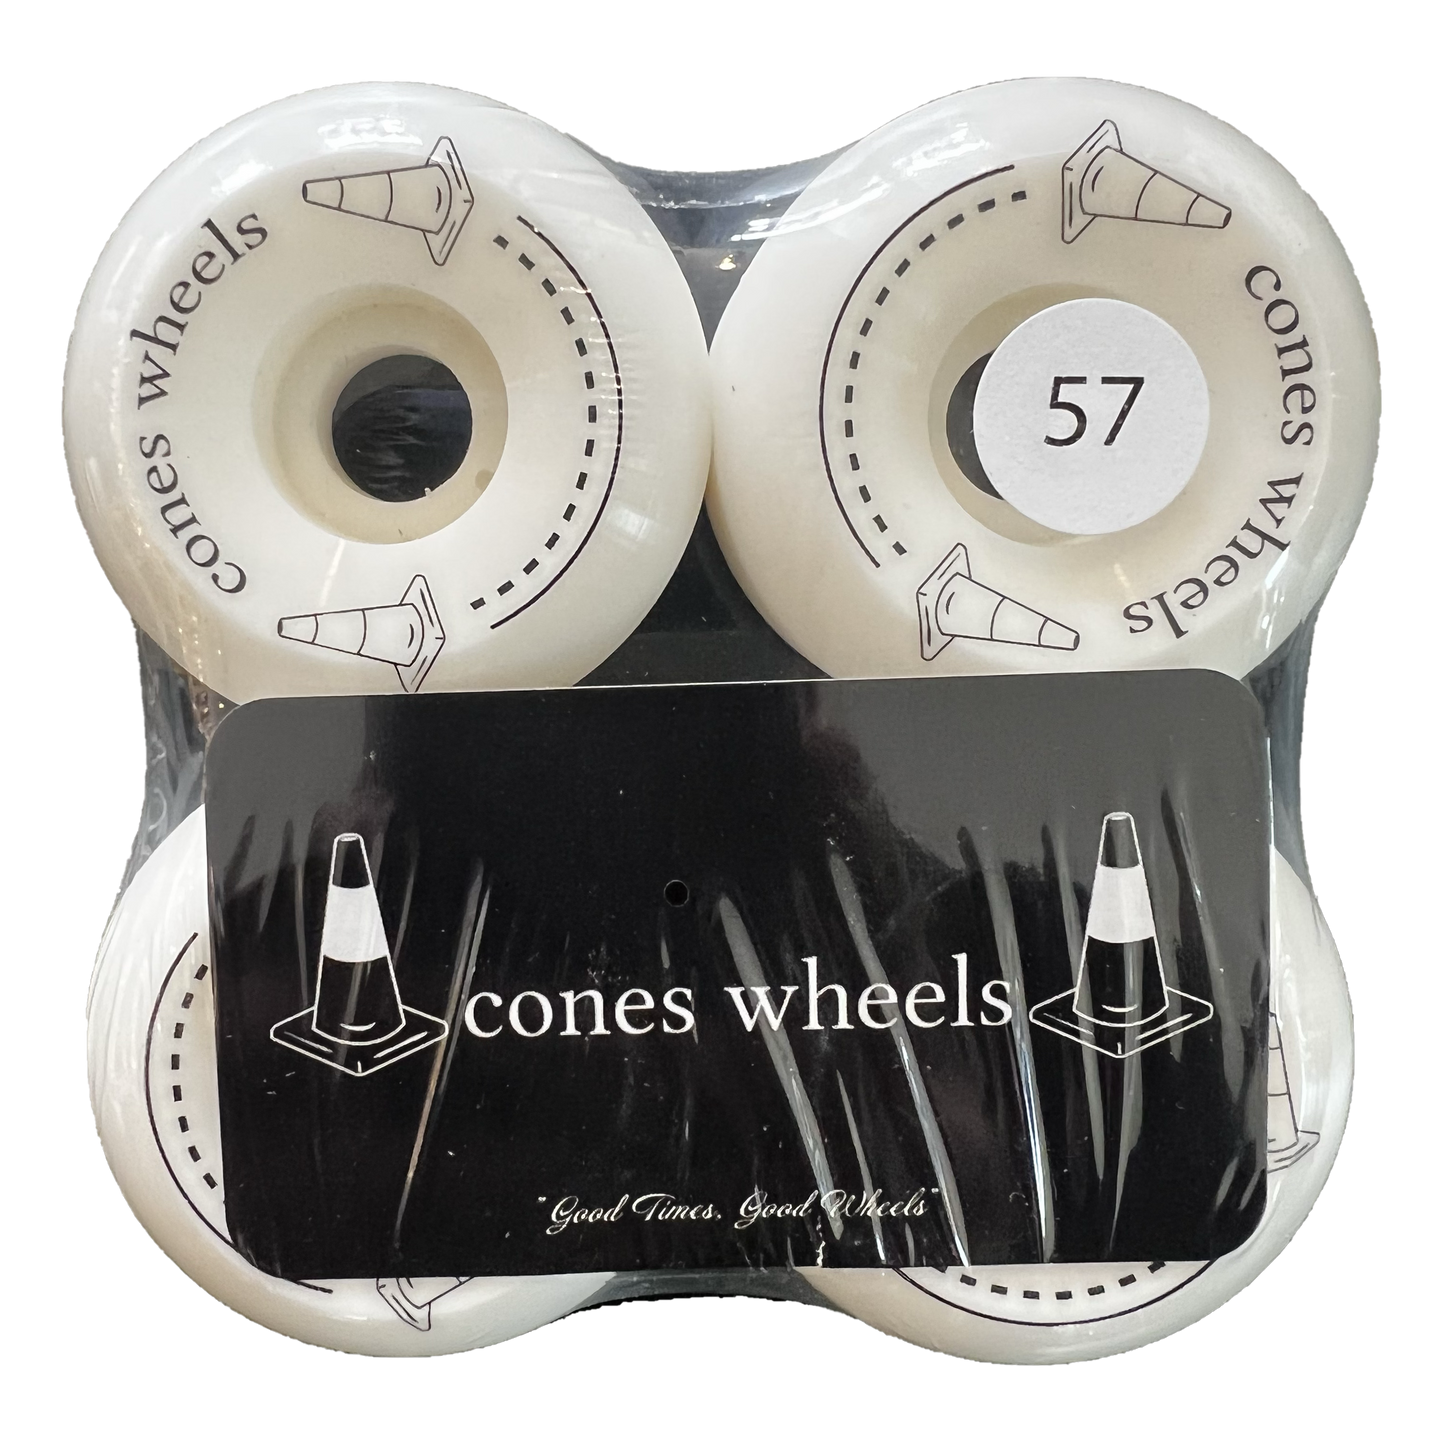 Cones Wheels King Of The Road 57mm 101a Original Formula Conical Shape White